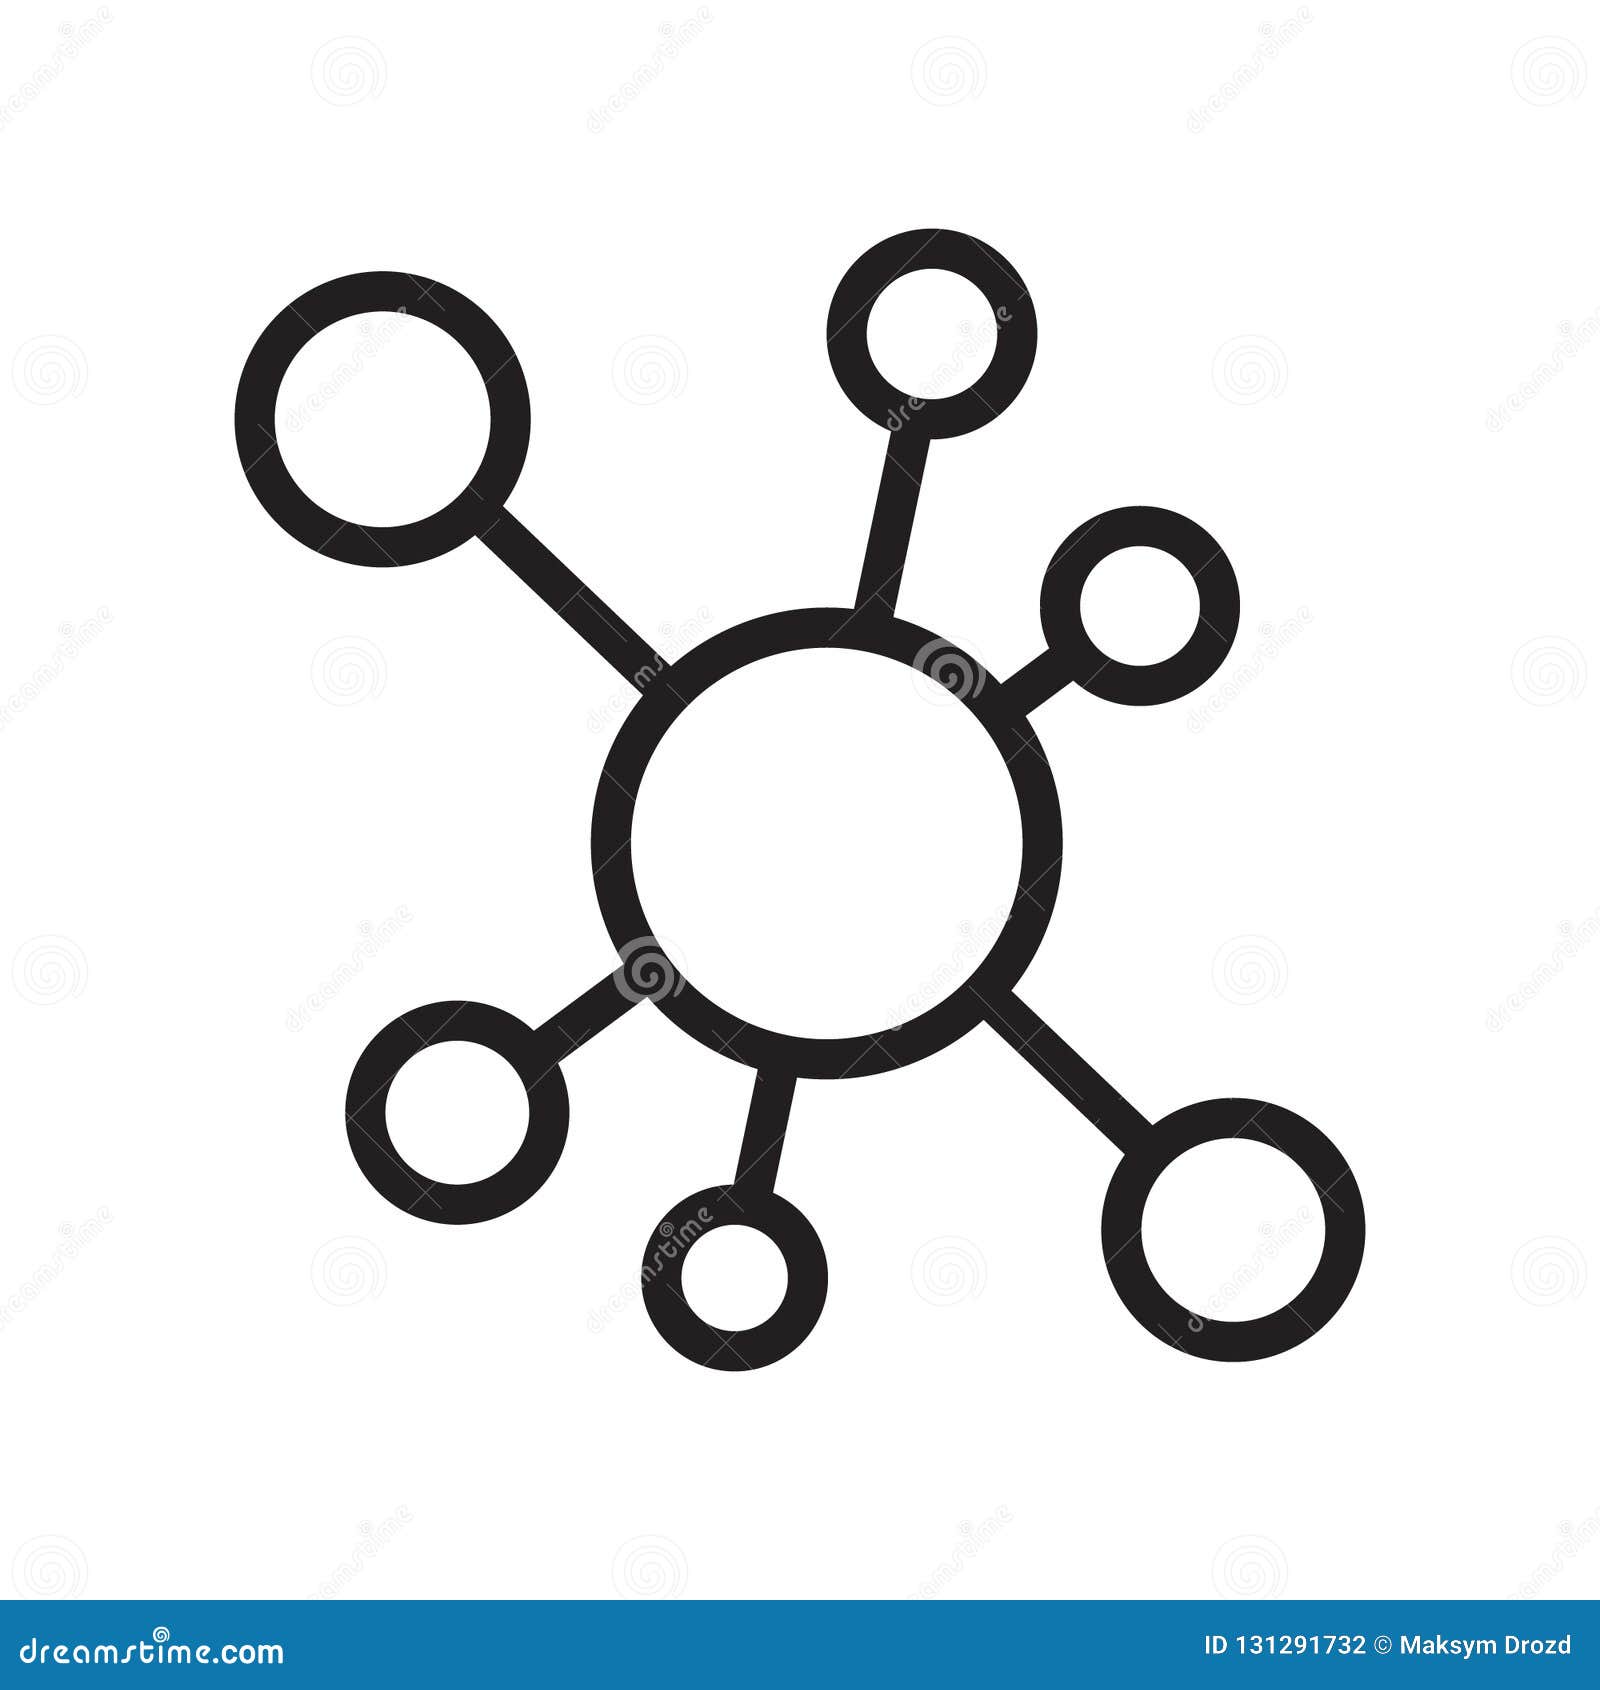 hub network connection icon